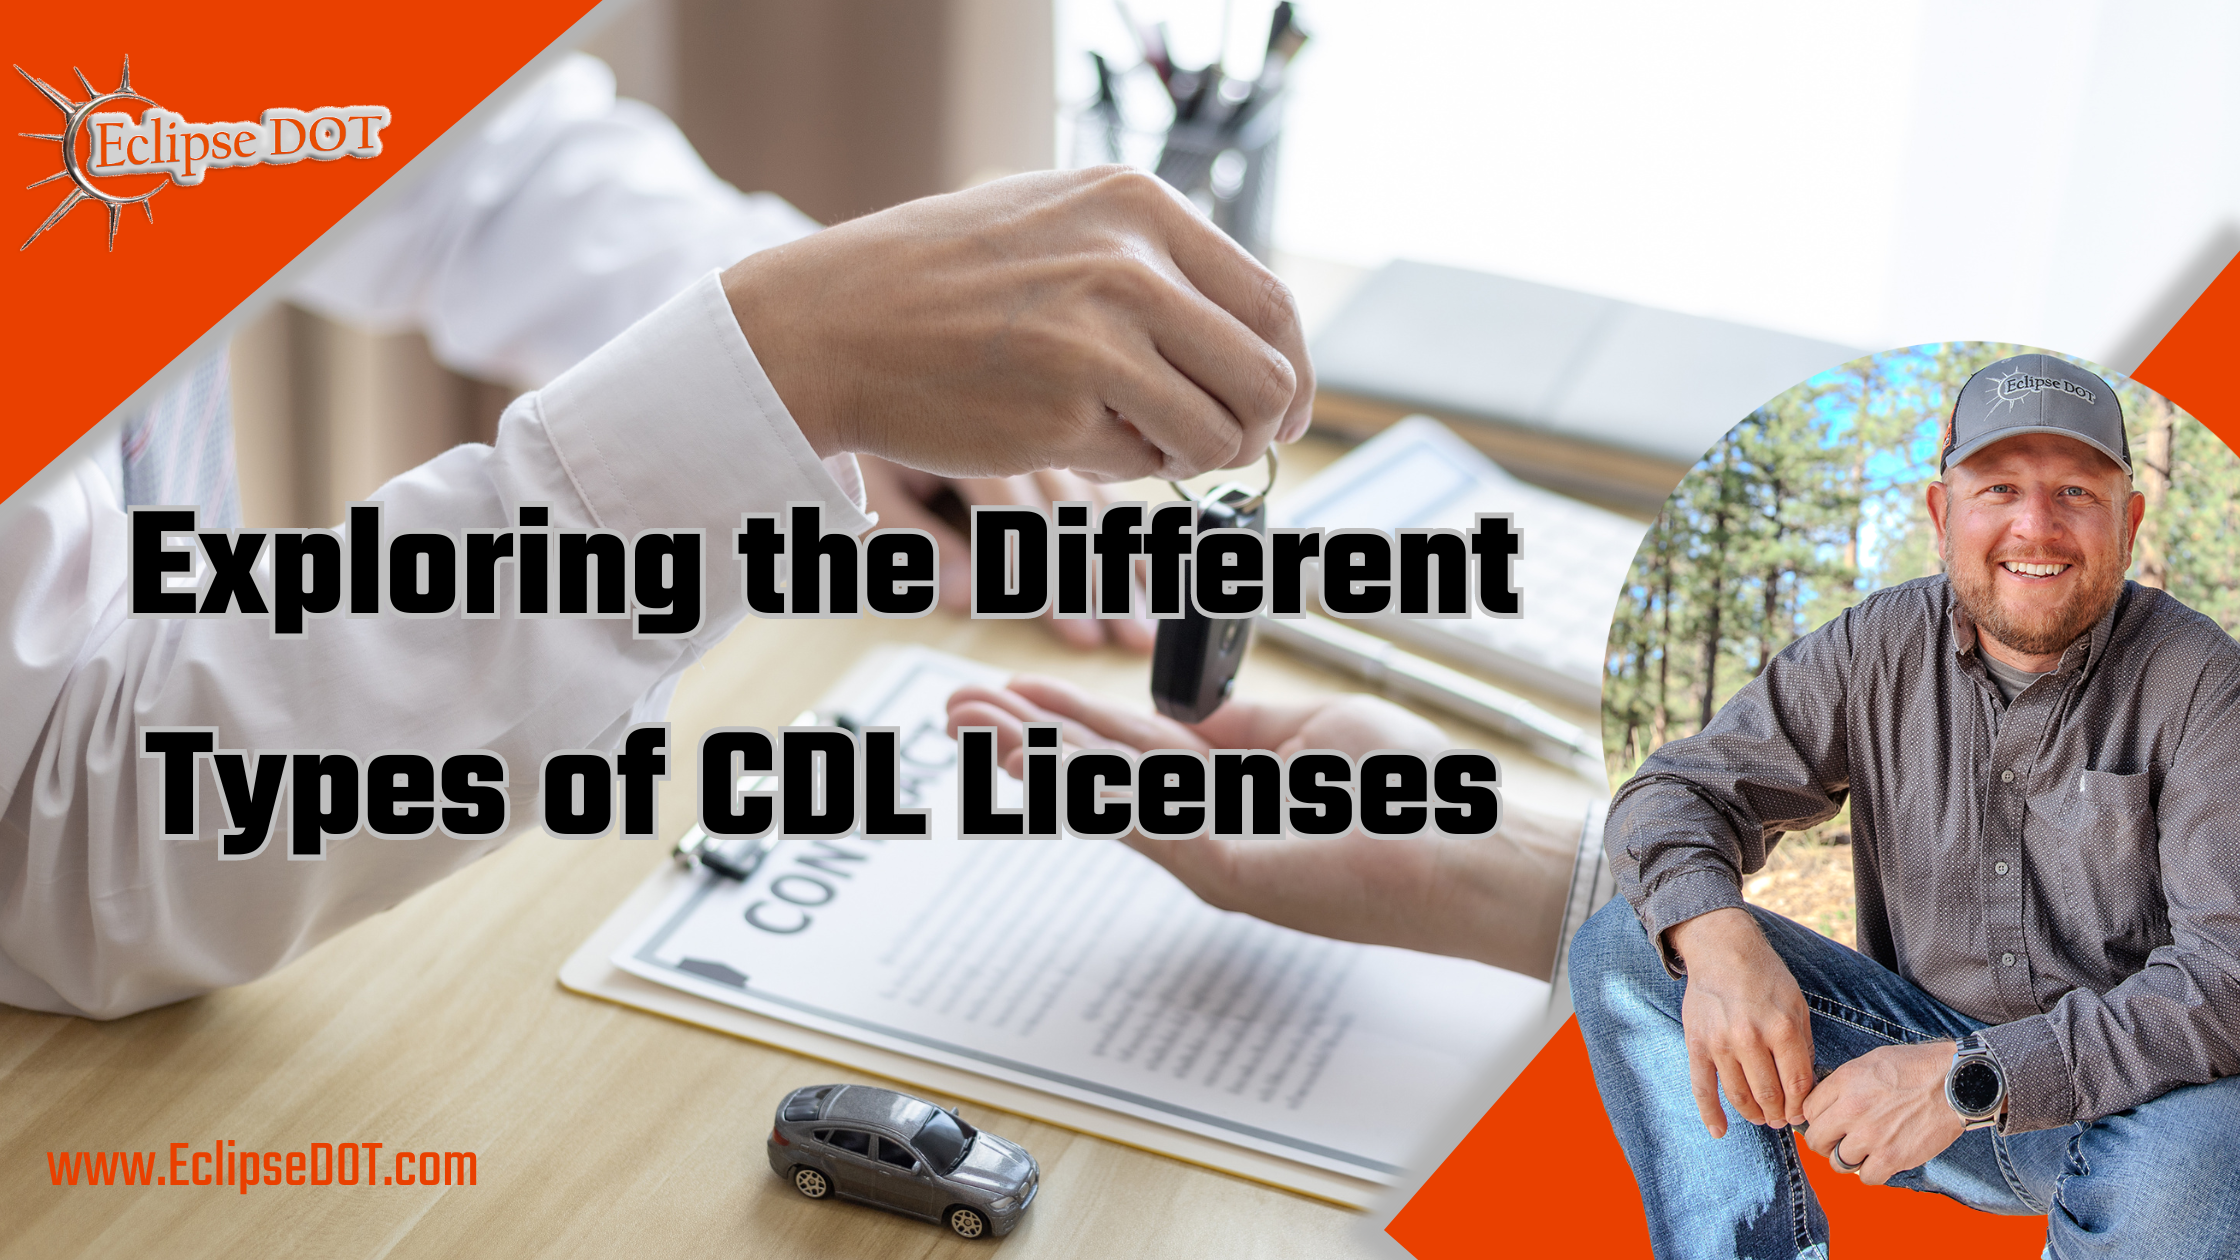 Different types of CDL licenses are displayed with associated commercial vehicles.